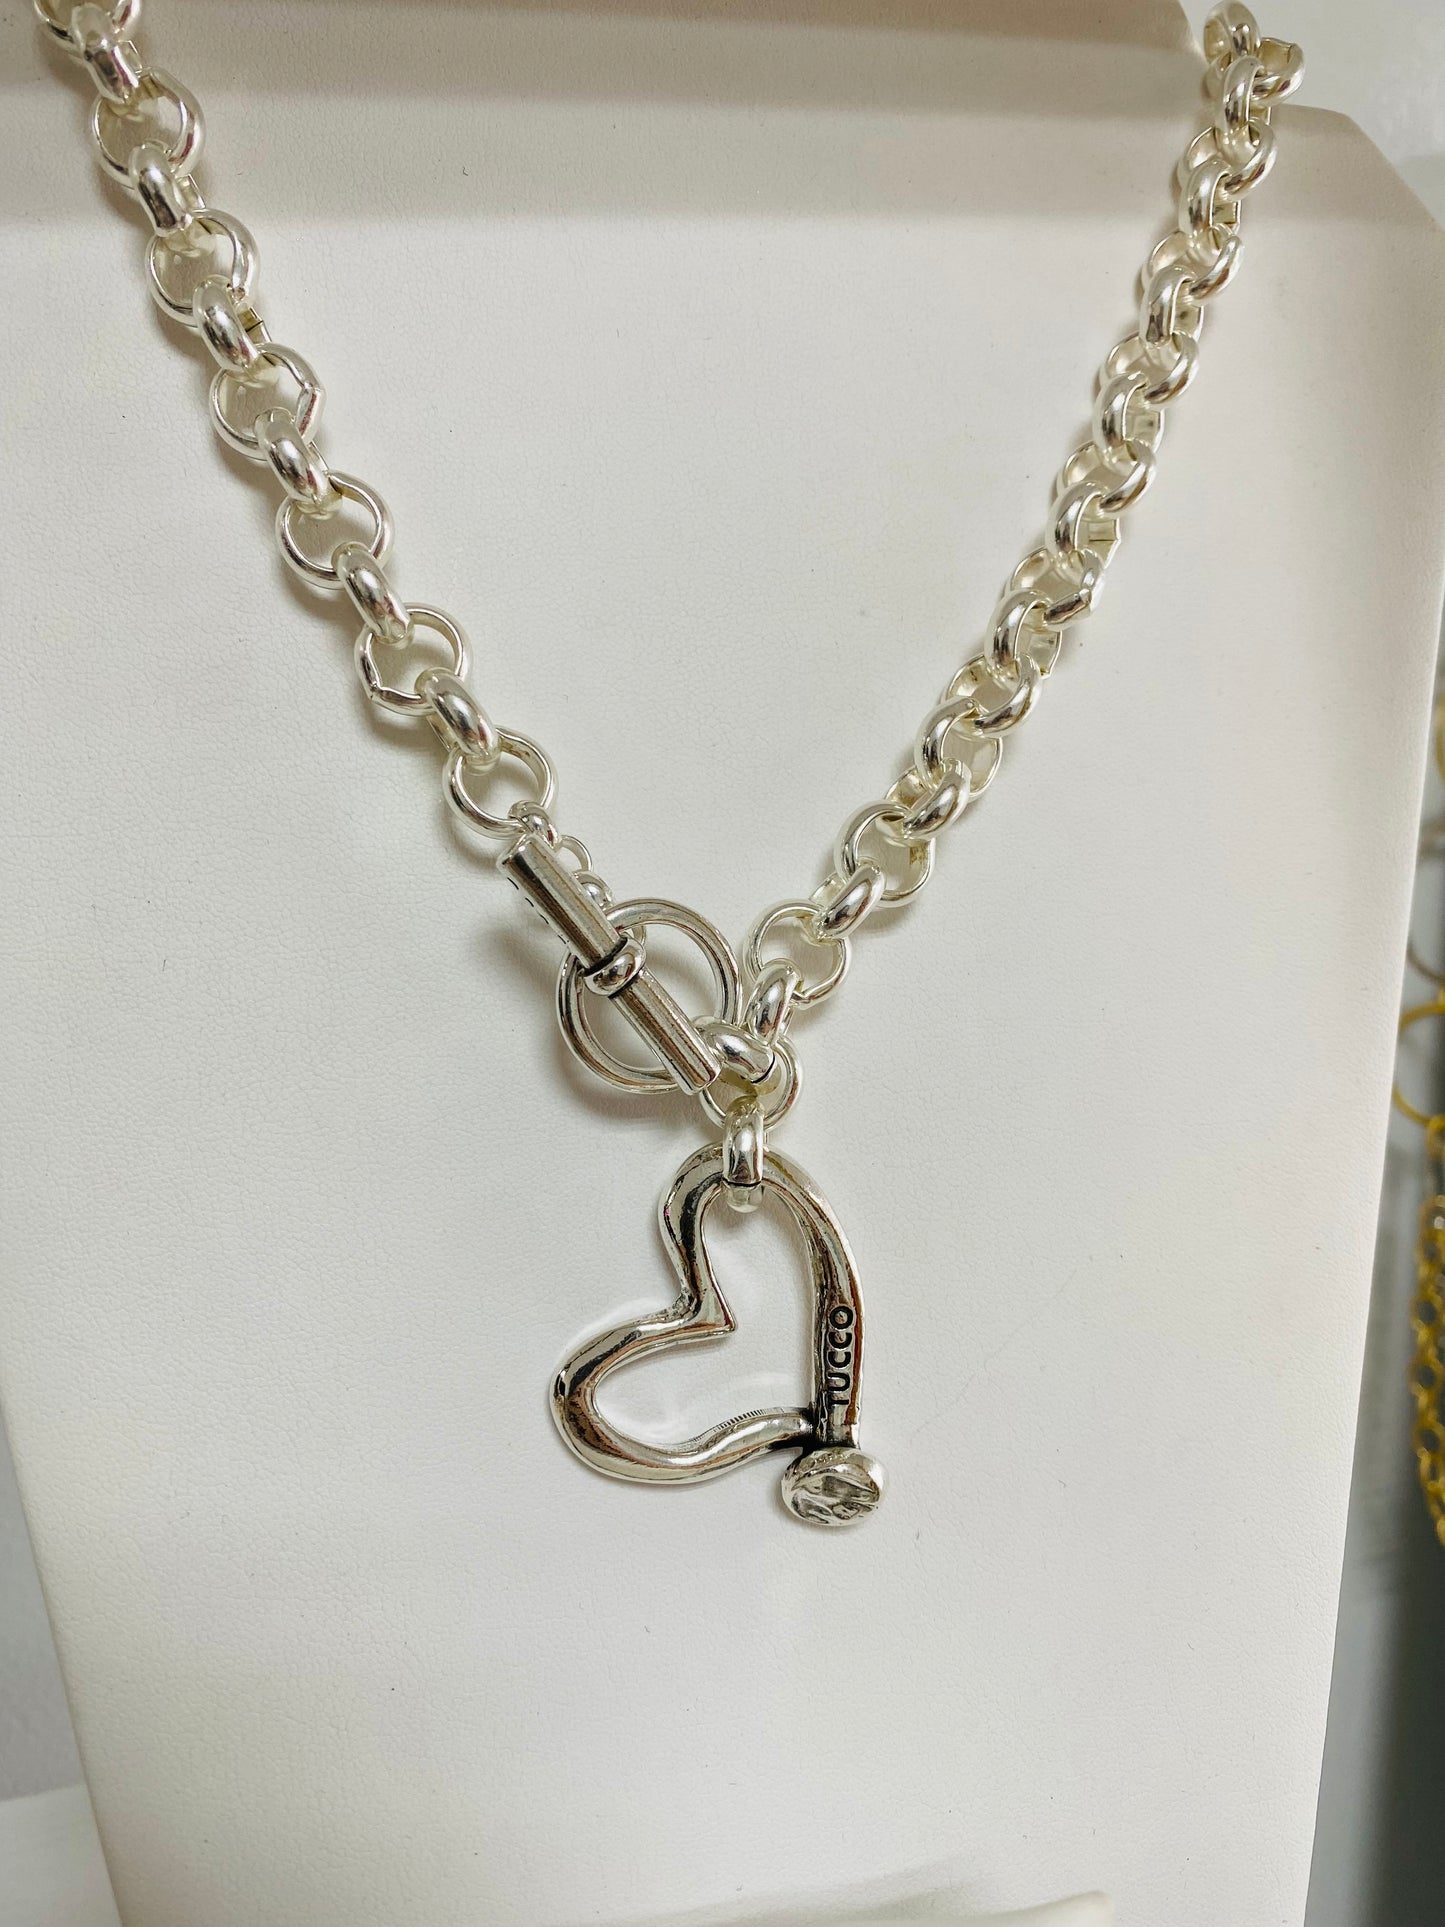 Tucco Heart short Necklace- Silver Plated